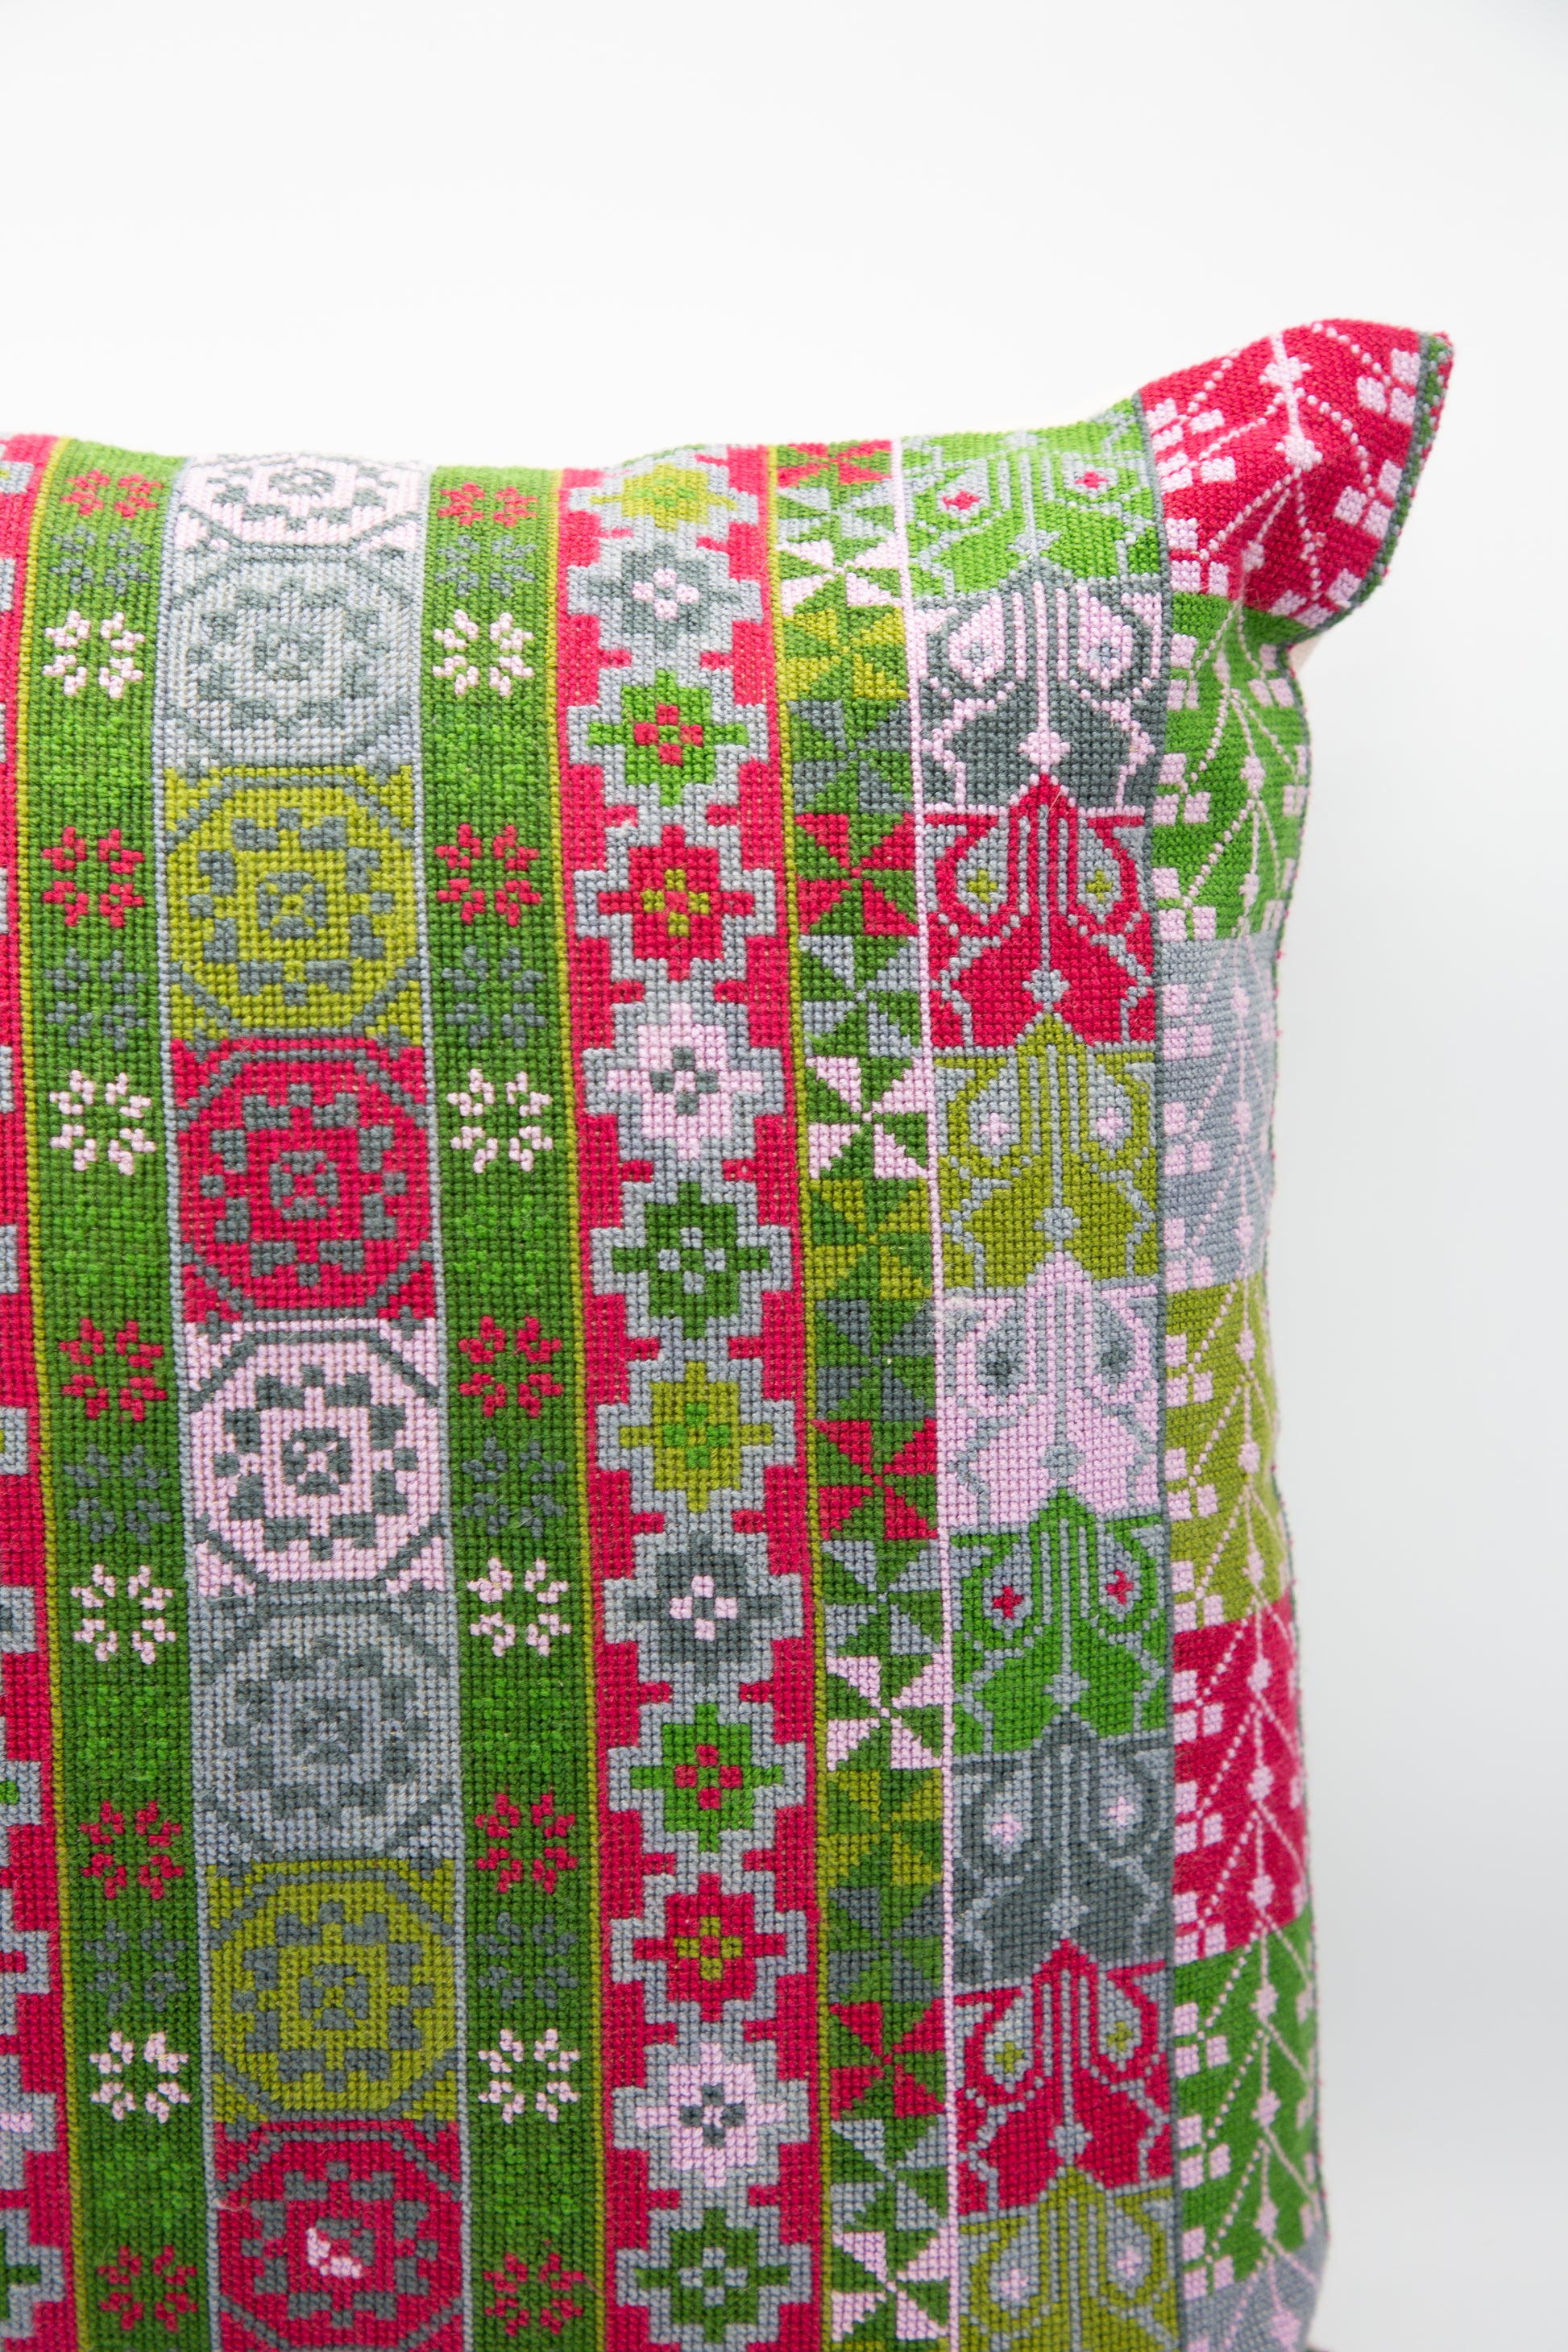 A Malak Hand Embroidered Pillow in Emerald and Crimson by Kissweh with a green and pink pattern.